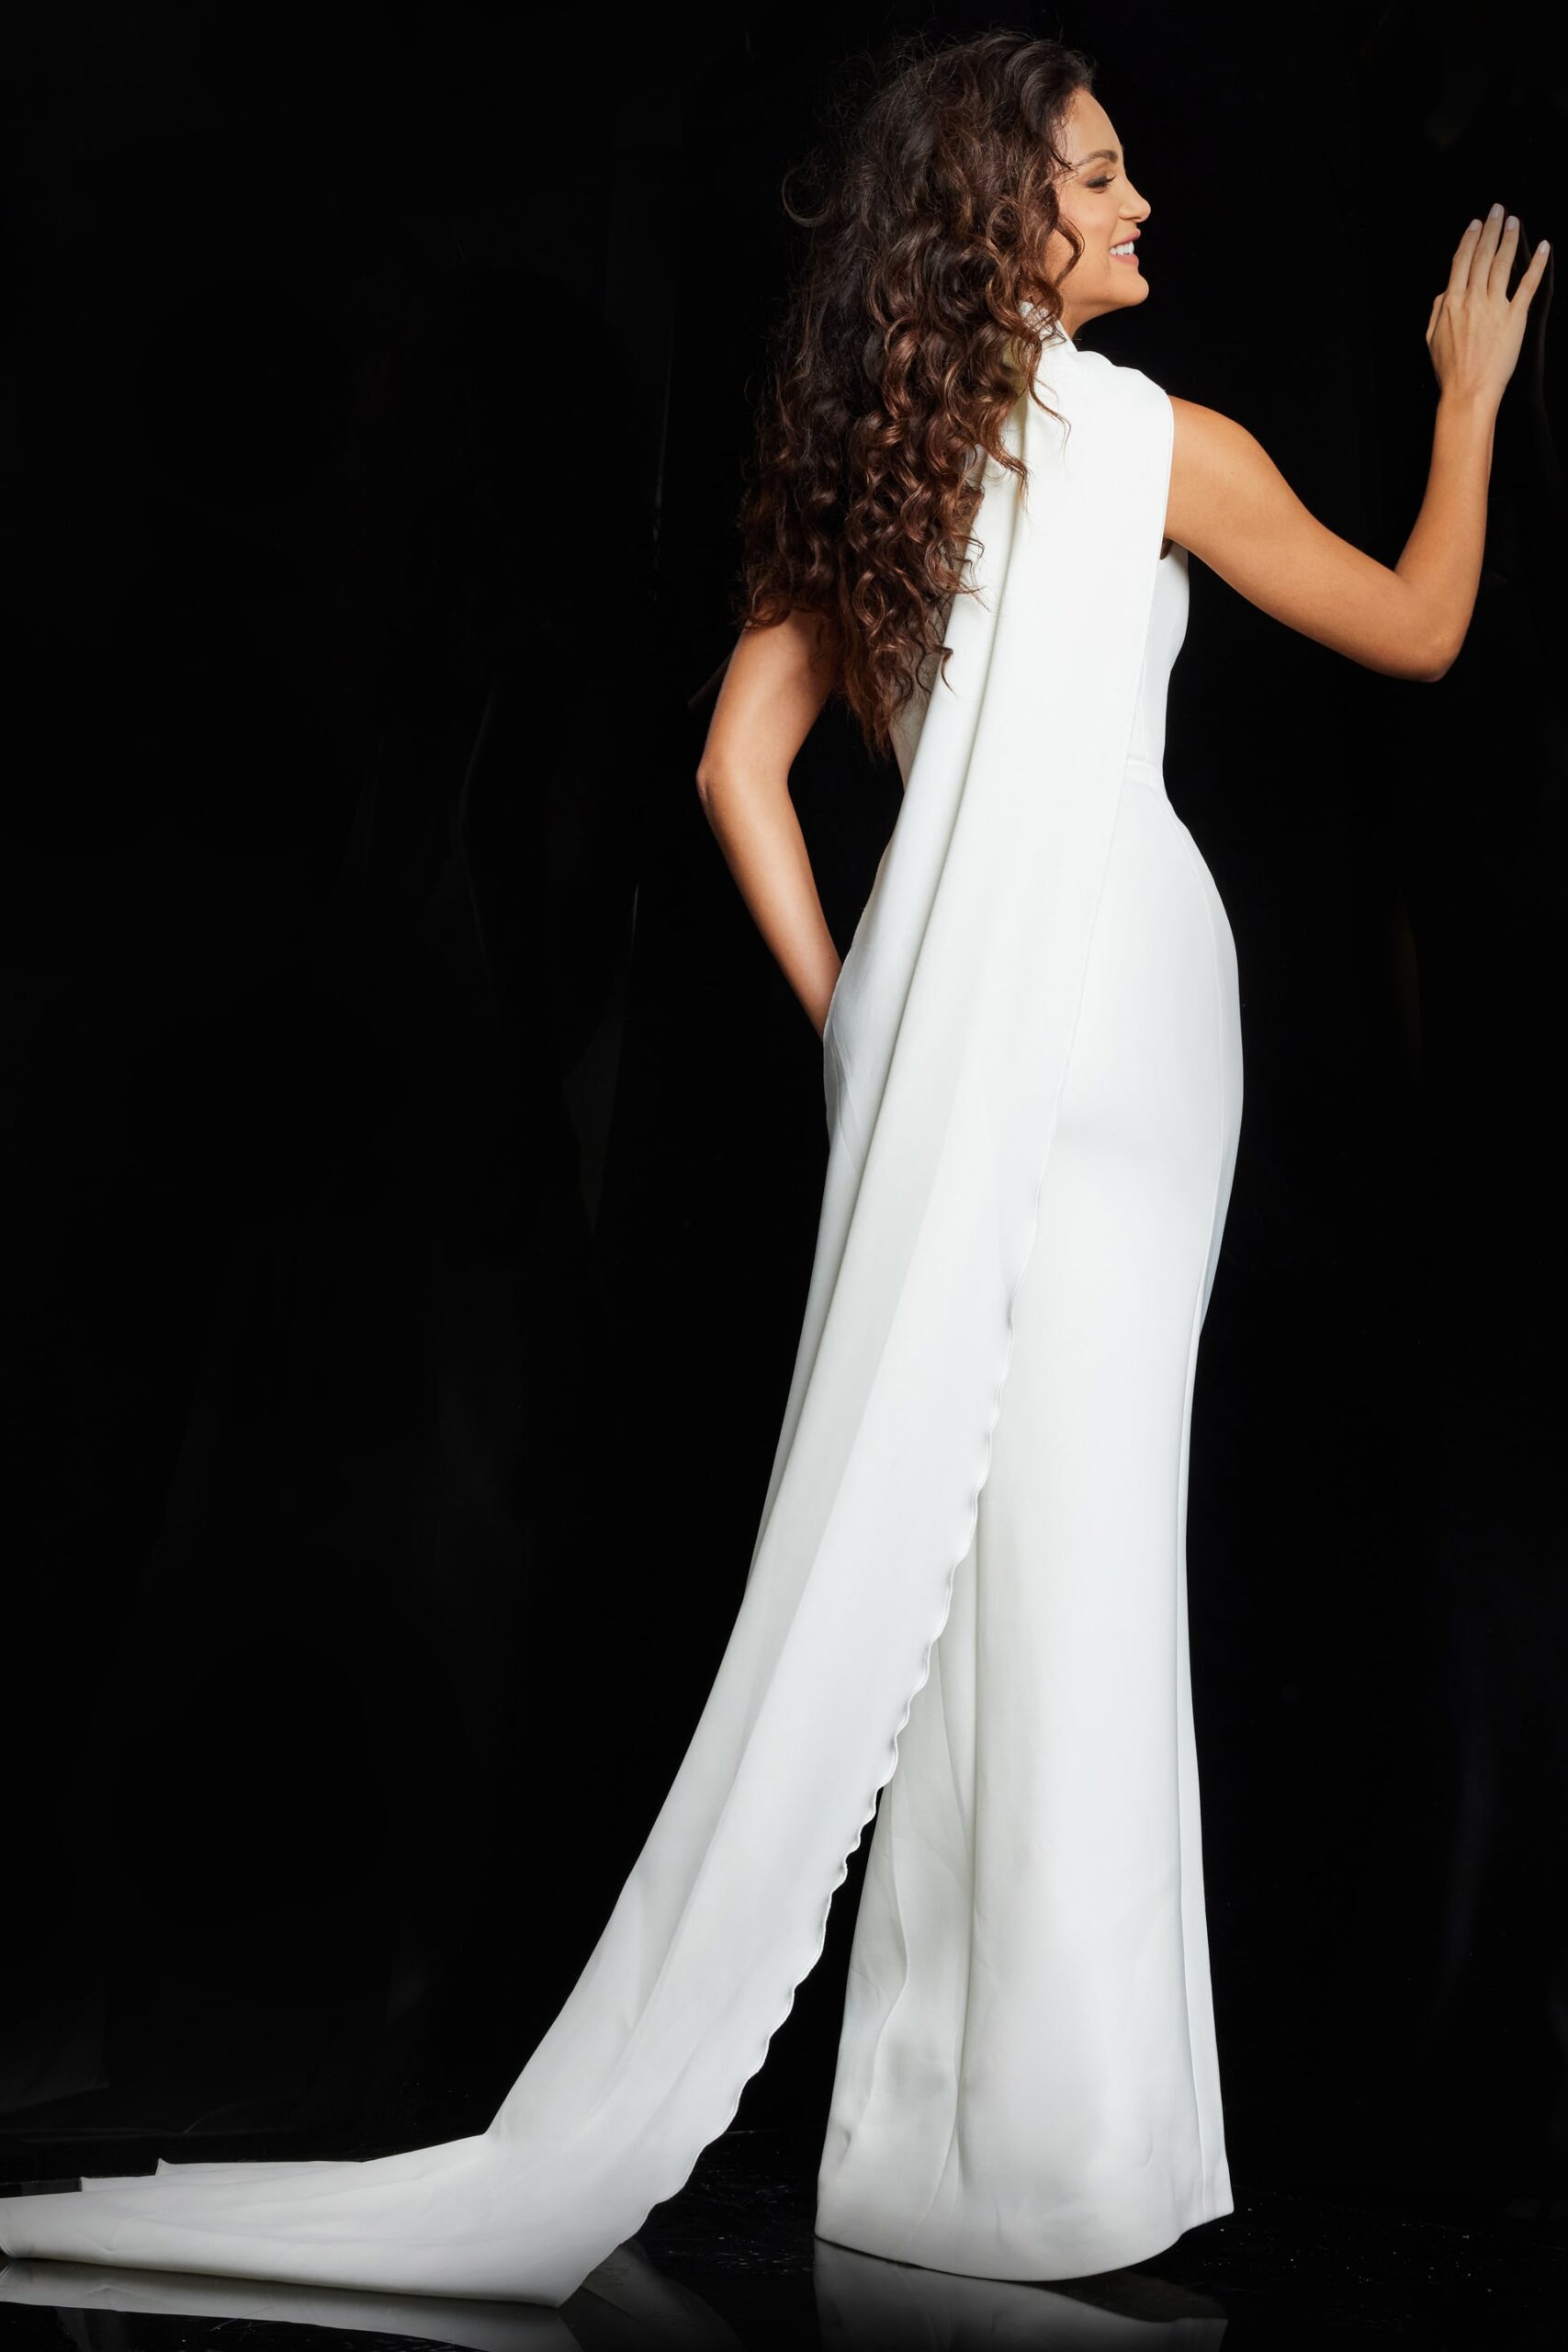 White High Neck Sleeveless Evening Gown 09709